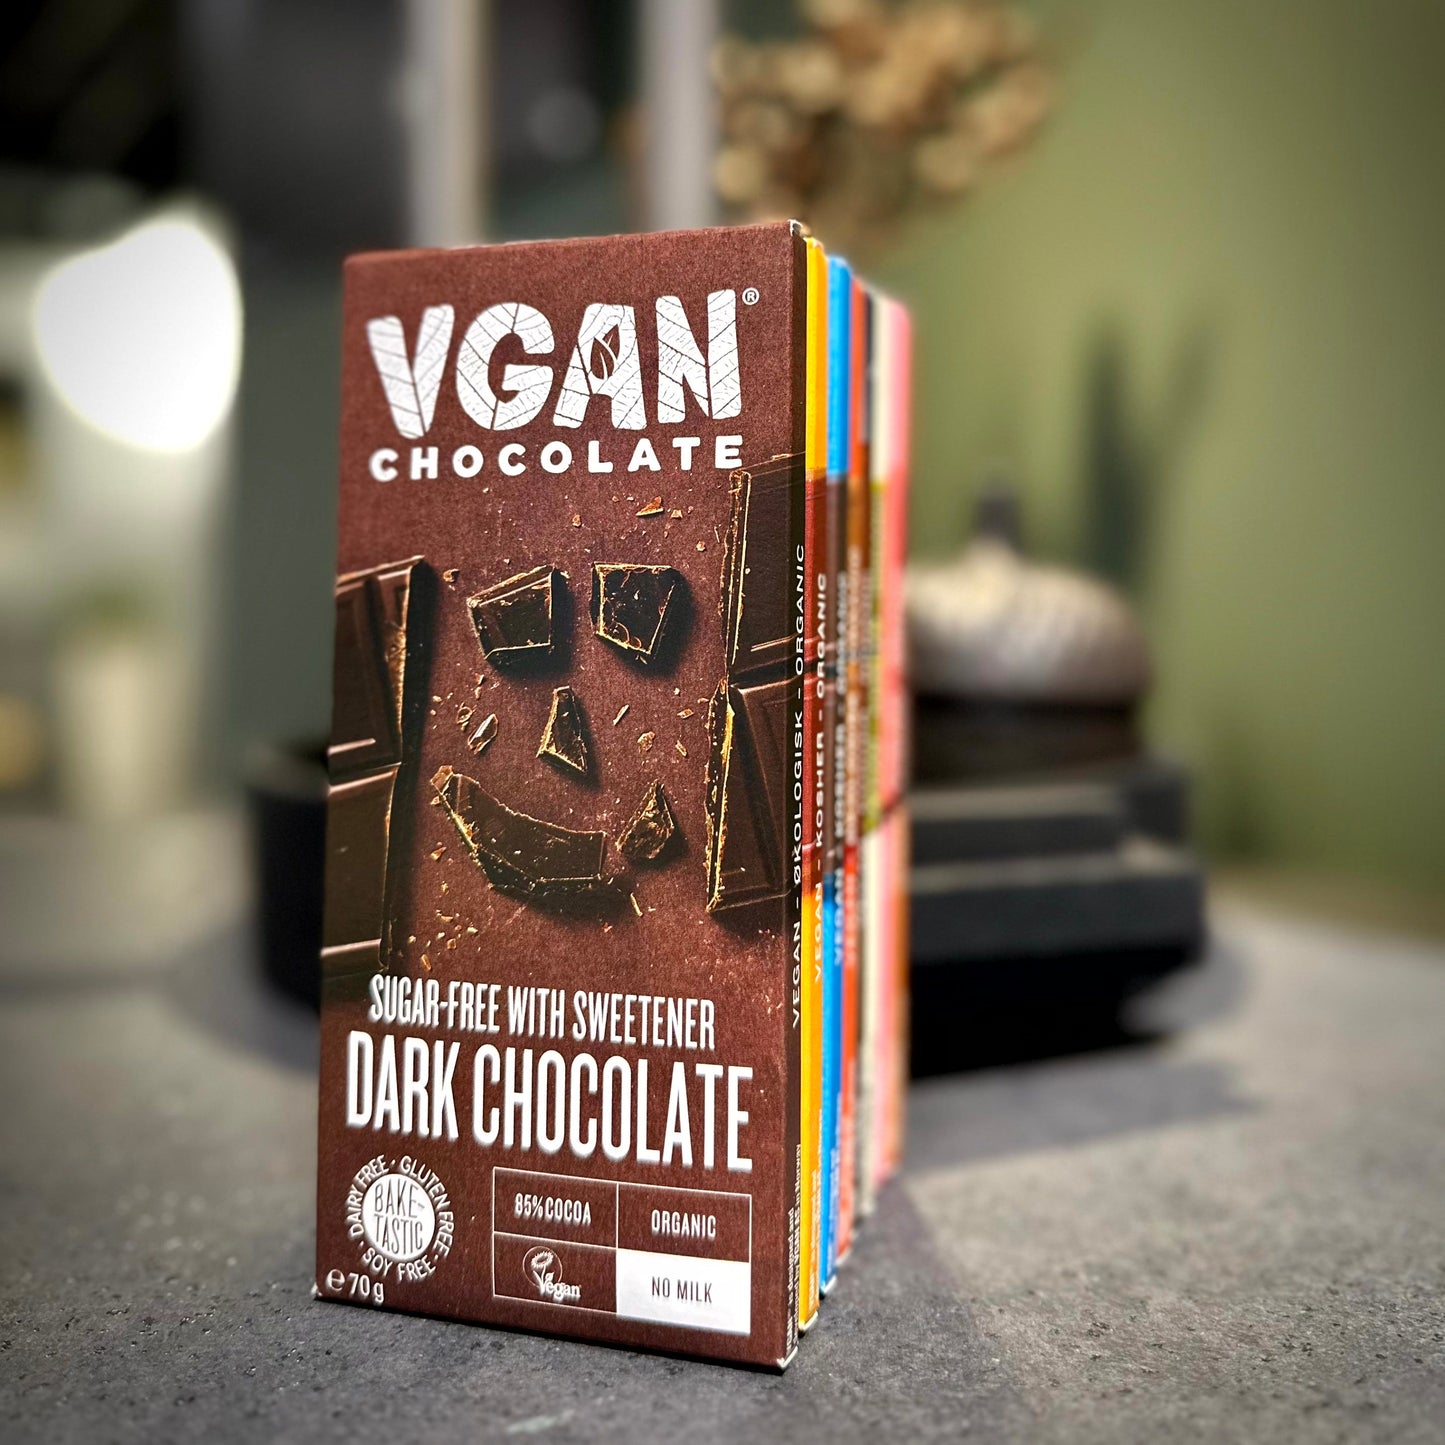 Vegan Chocolates Variety 8 Pack Limited Edition in a bundle with Dark Sugar-Free  Chocolate shown in front